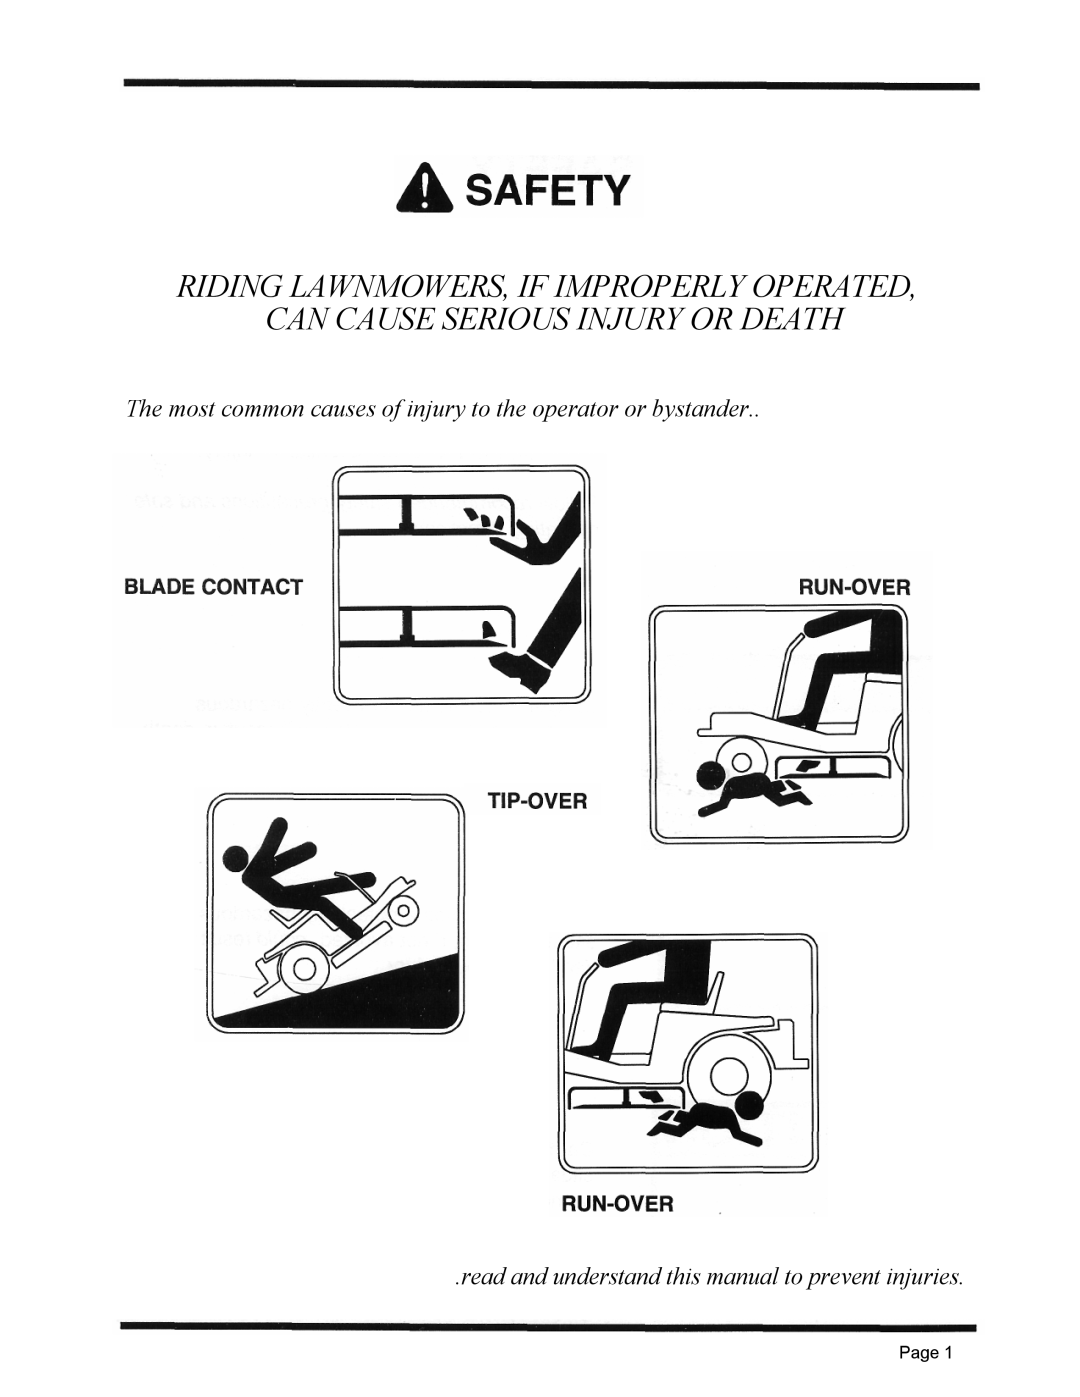 Dixon ZTR 4515K, 1998 manual The most common causes of injury to the operator or bystander, Page 